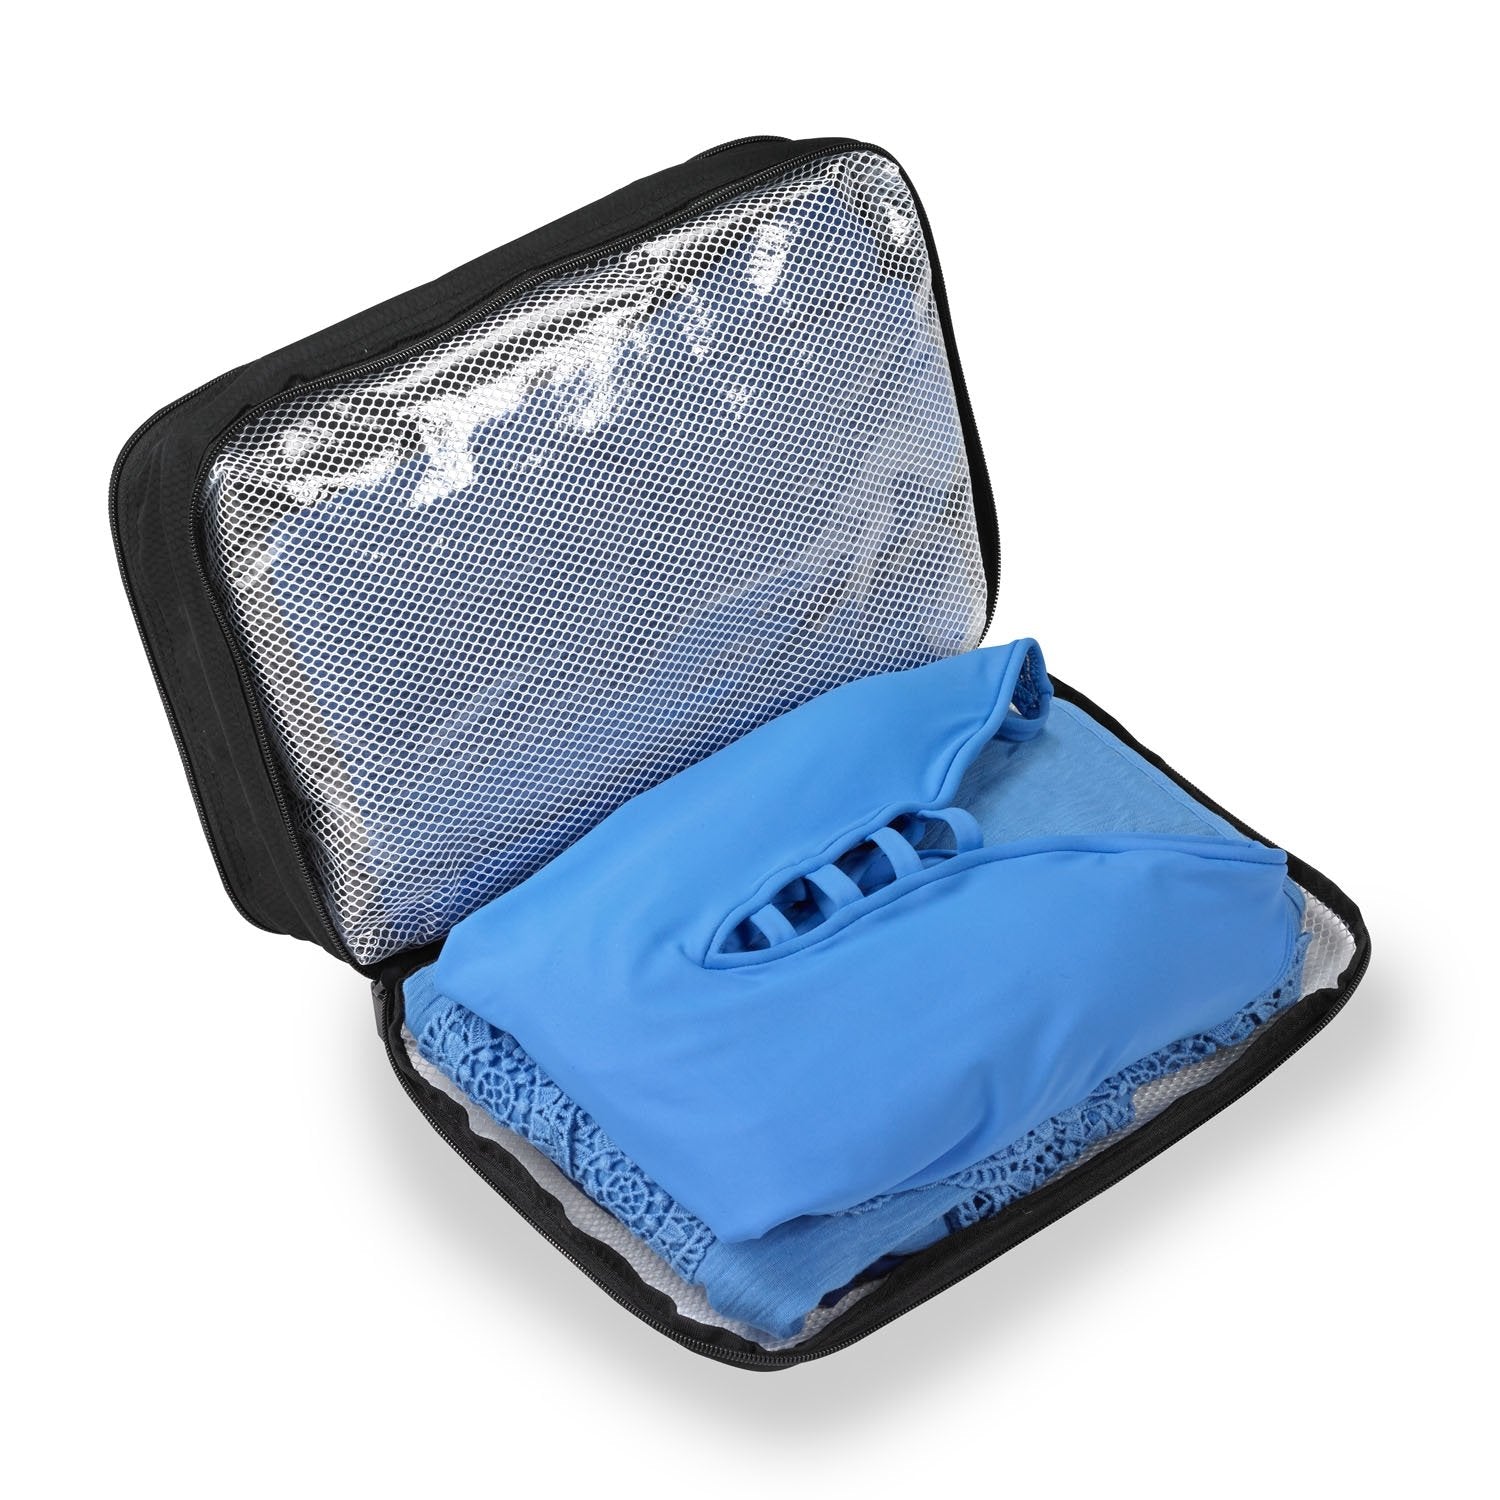 Briggs & Riley Accessories Packing Cubes Large Set W115-4